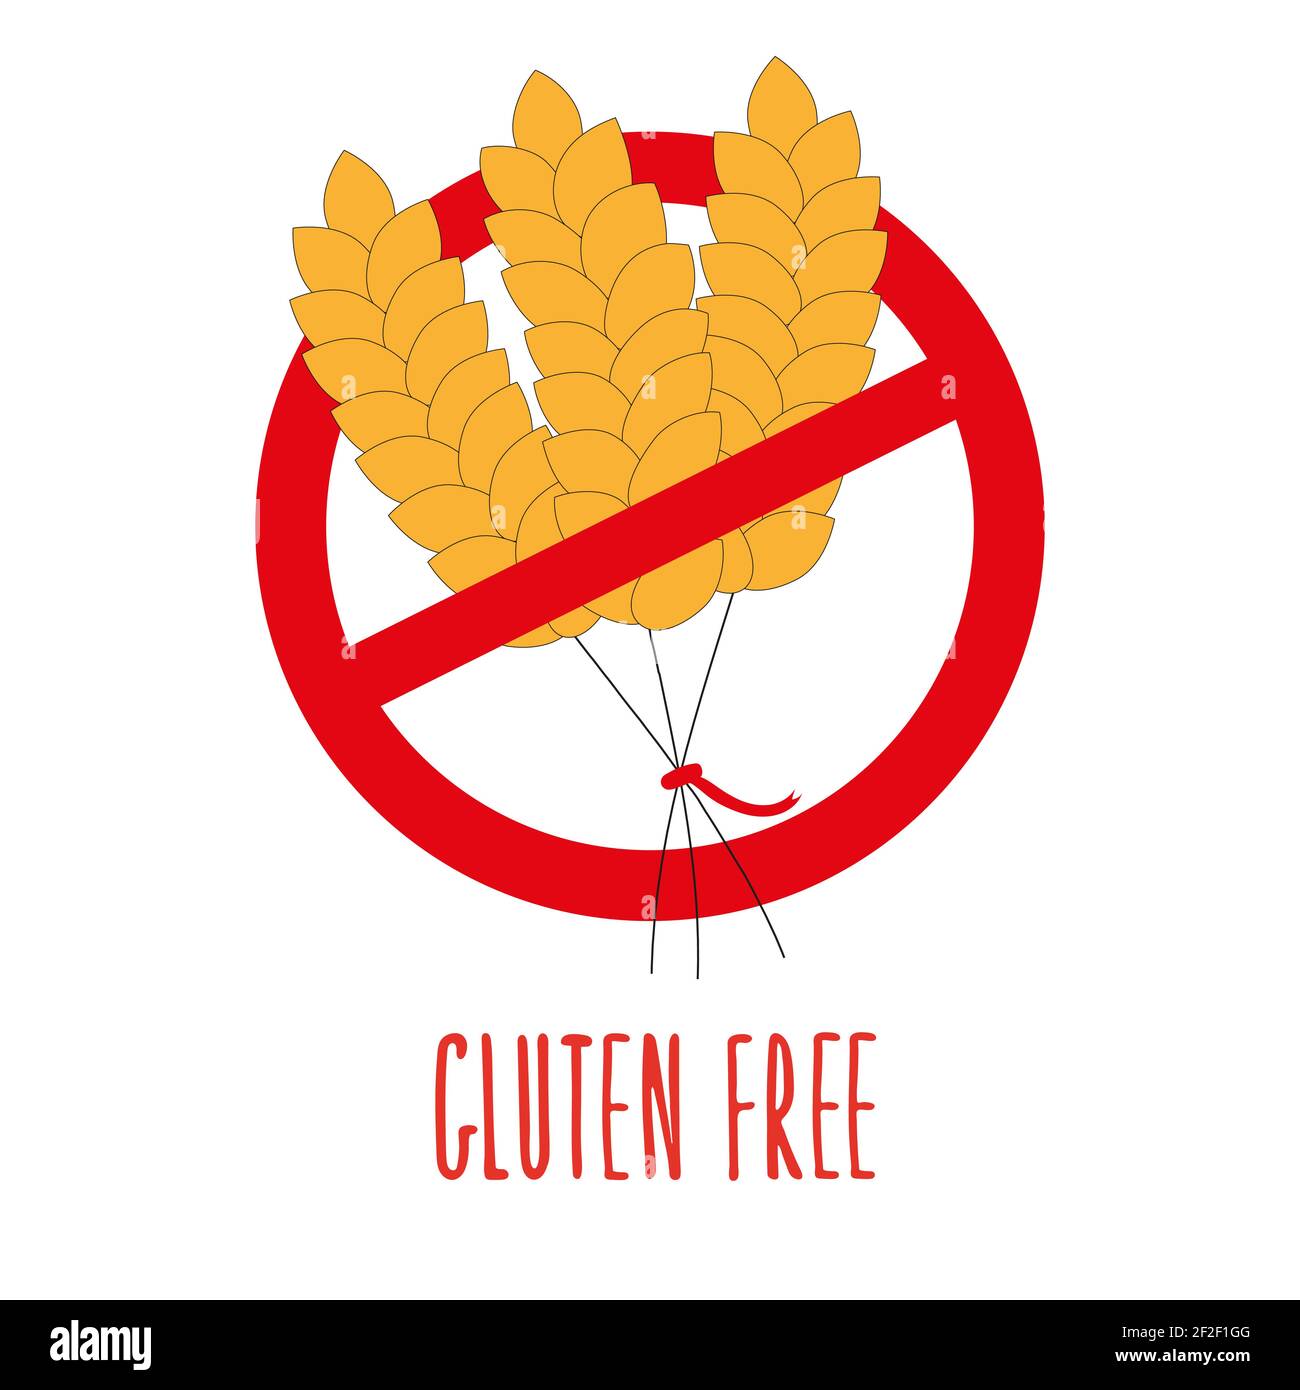 Gluten free label. No wheat symbol. Celiac products label design. Red round restrictive sign with yellow heads of wheat and hand written phrase. Isola Stock Vector